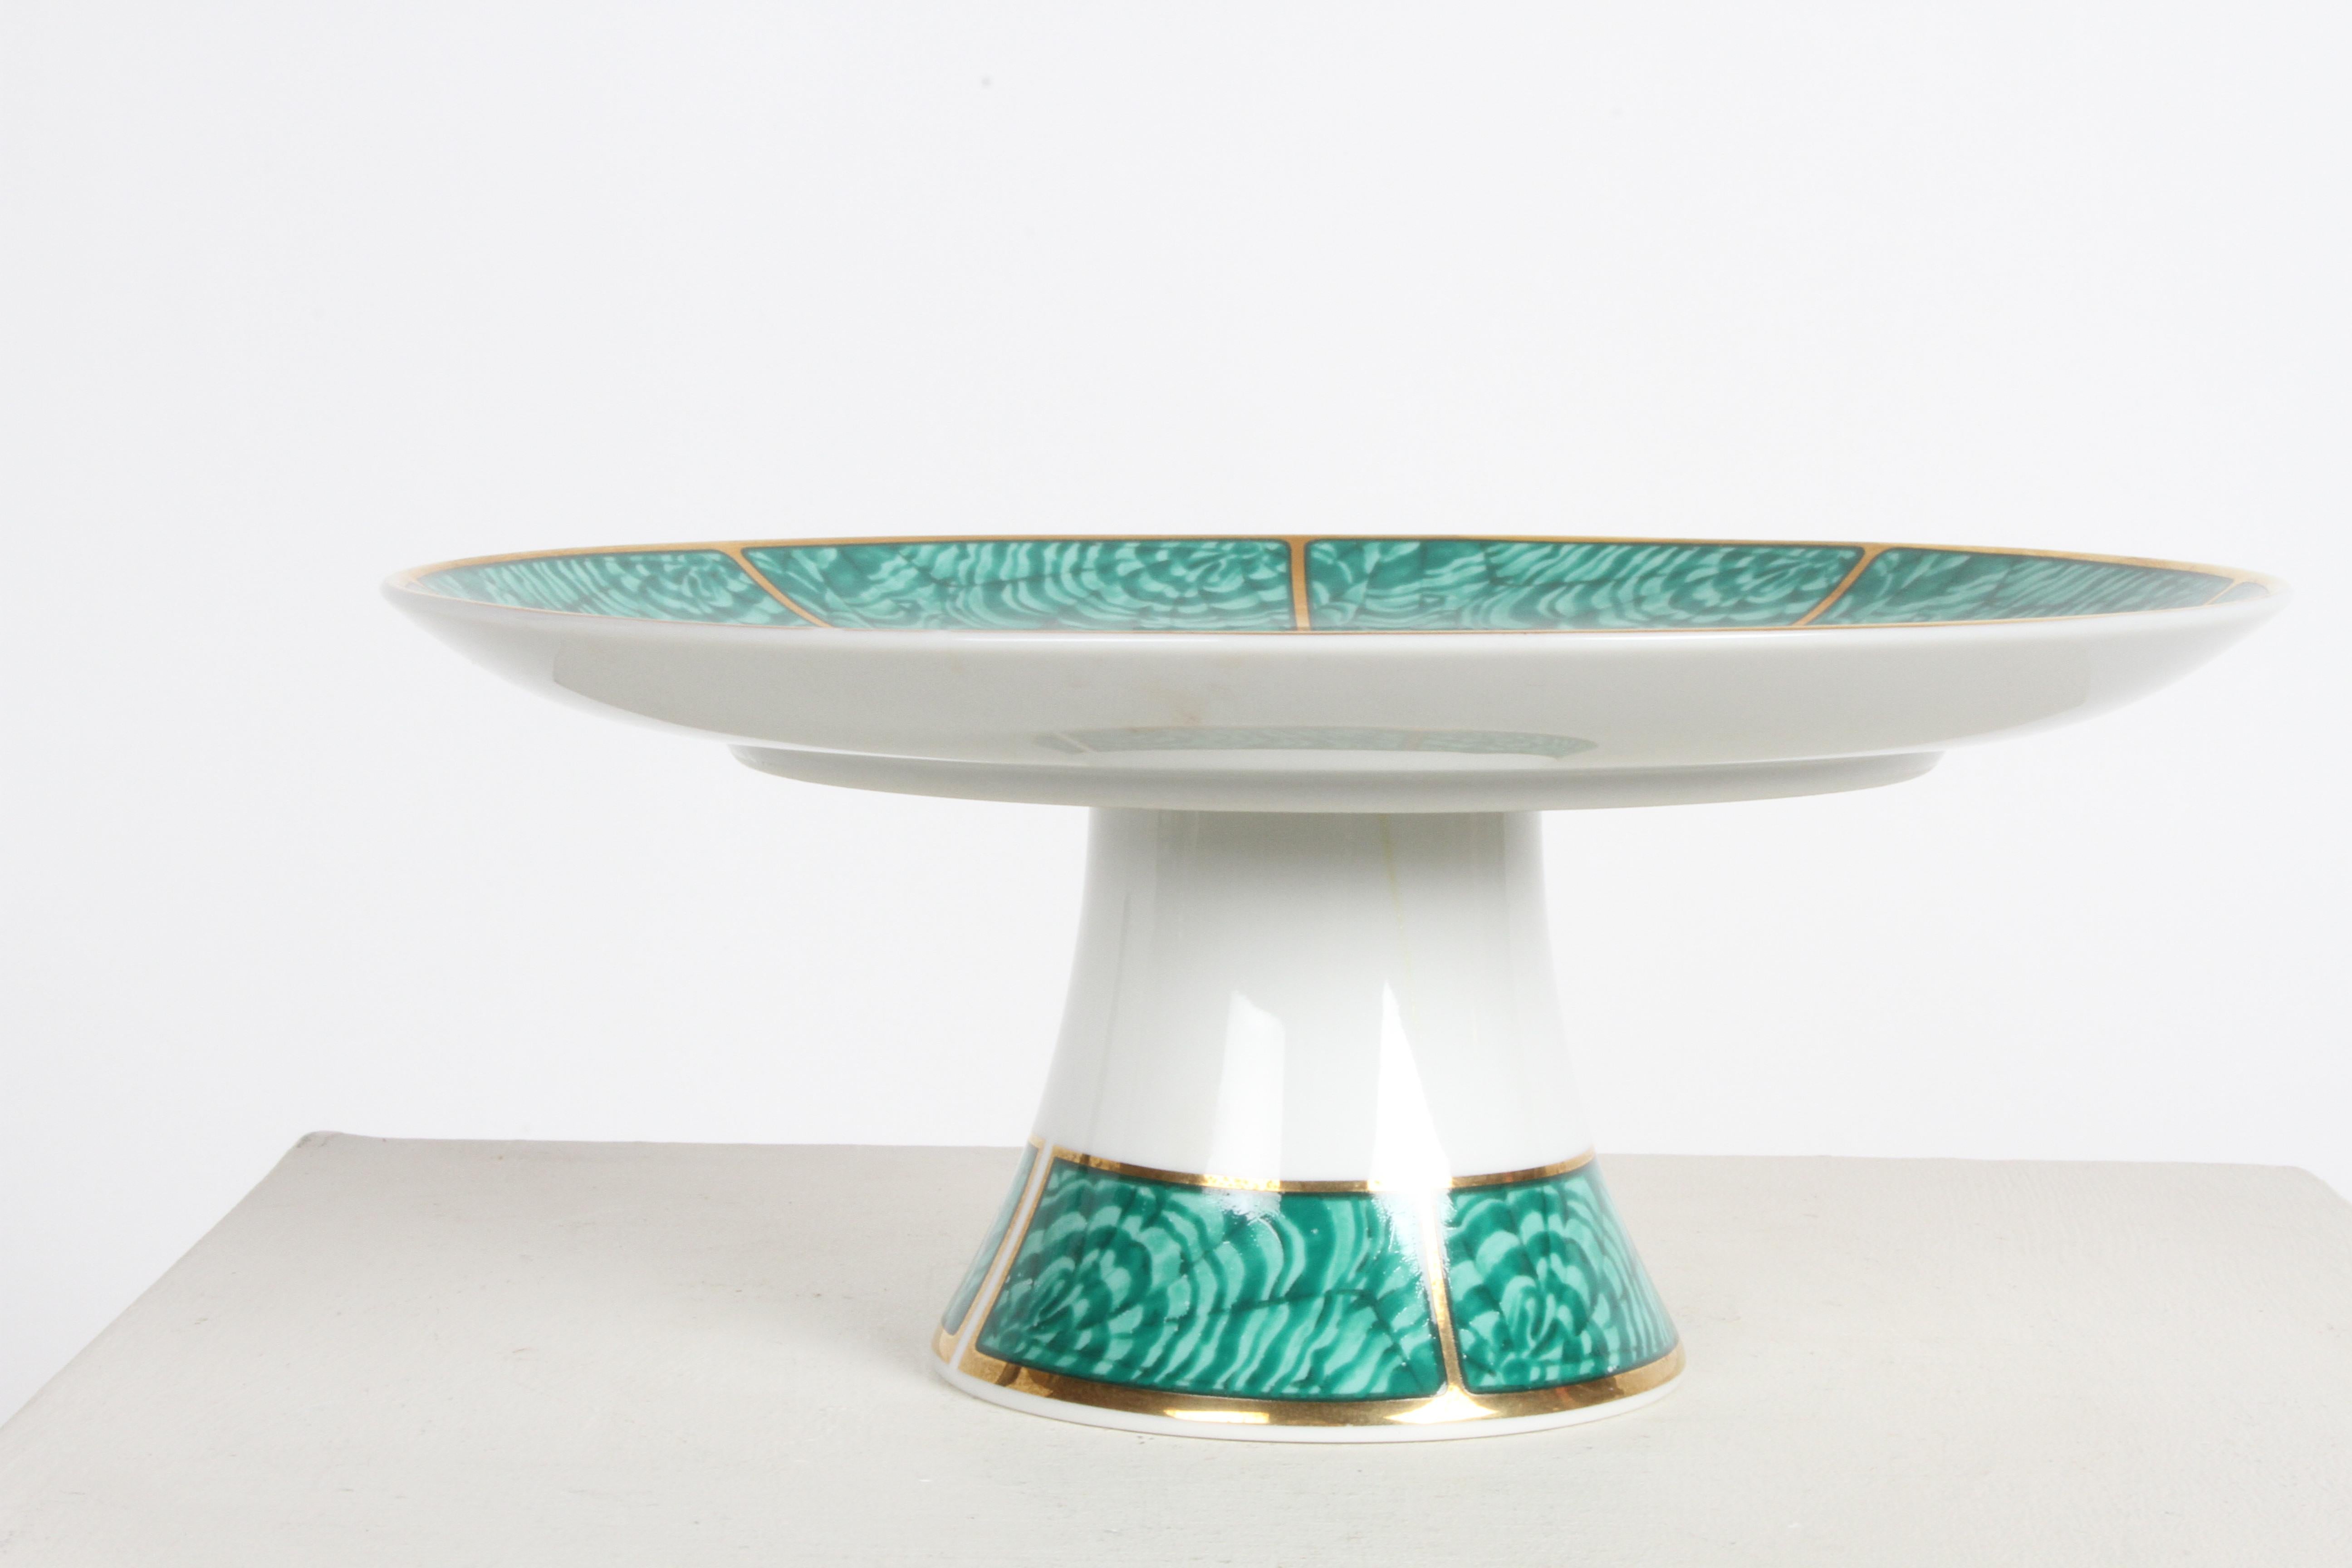 Georges Briard Mid-Century Modern designed Imperial Malachite China compote or cake stand. Faux malachite pattern, with 22k gold gilt. In fine condition, no visible signs of wear. Signed to the underside.